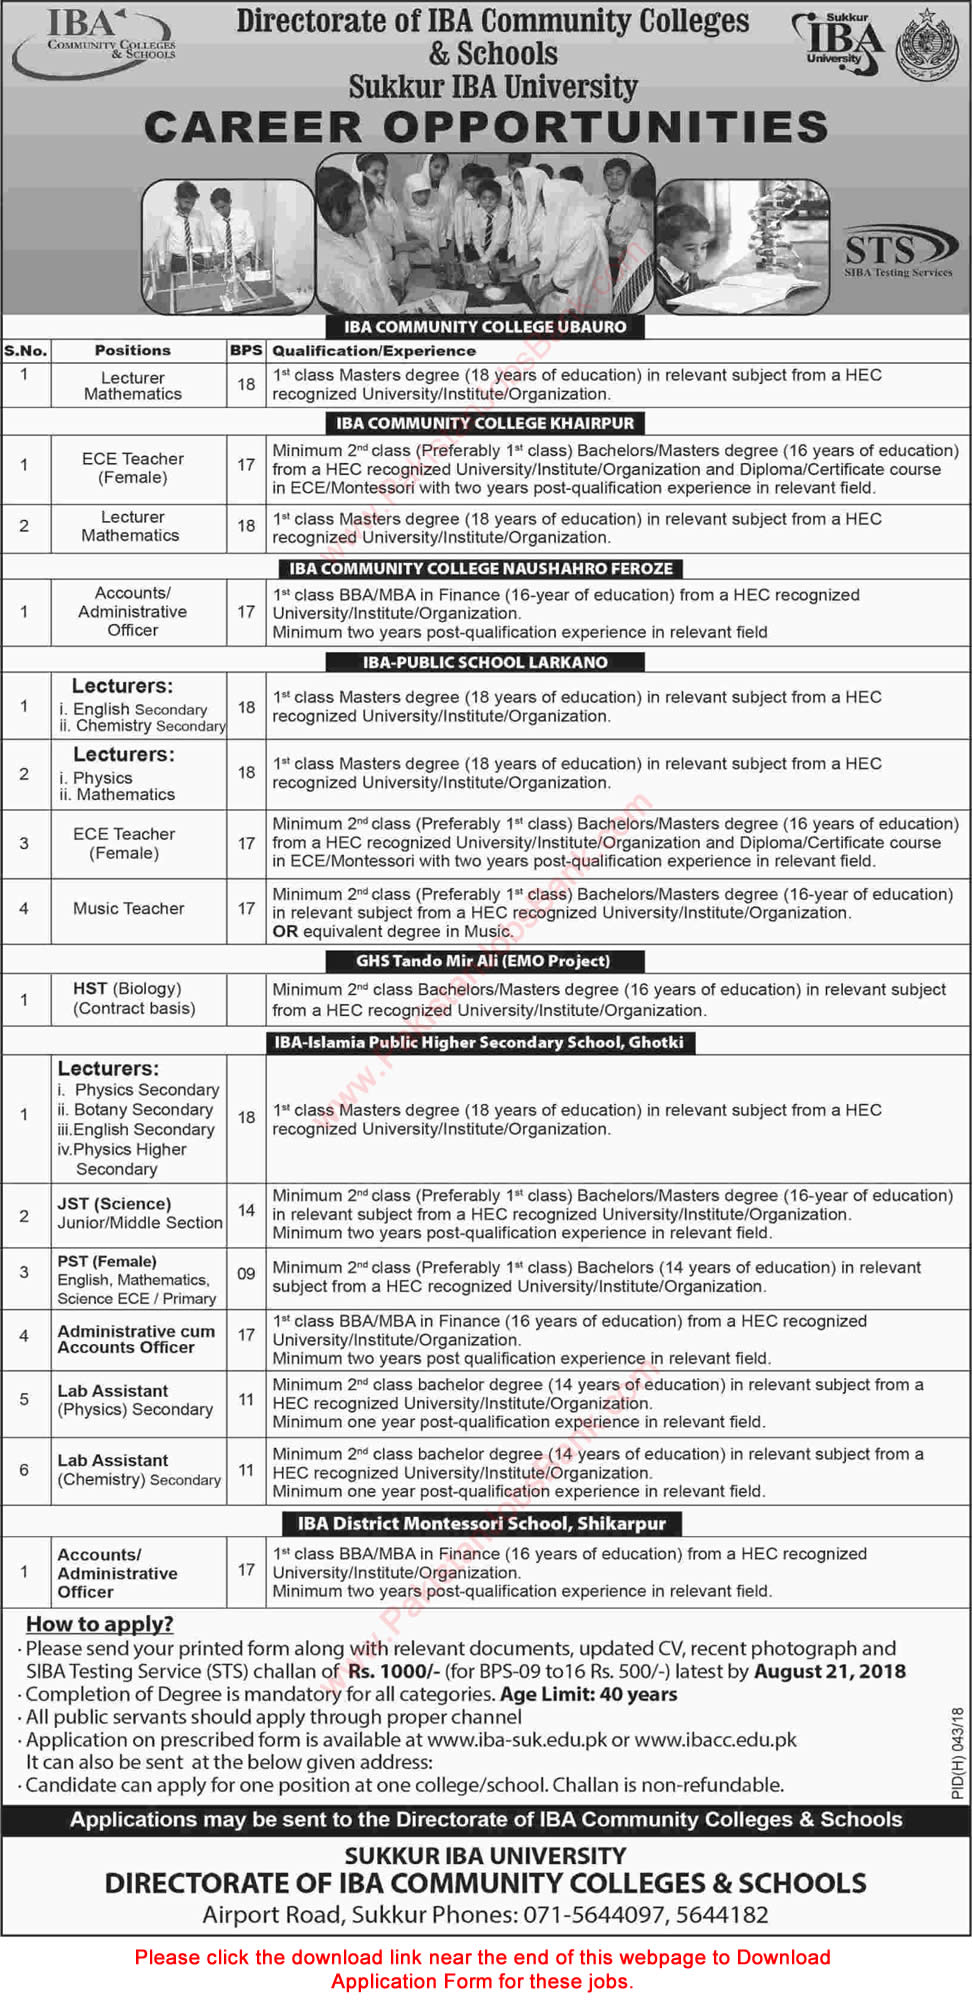 Directorate of IBA Community Colleges and Schools Jobs August 2018 Application Form Download Latest